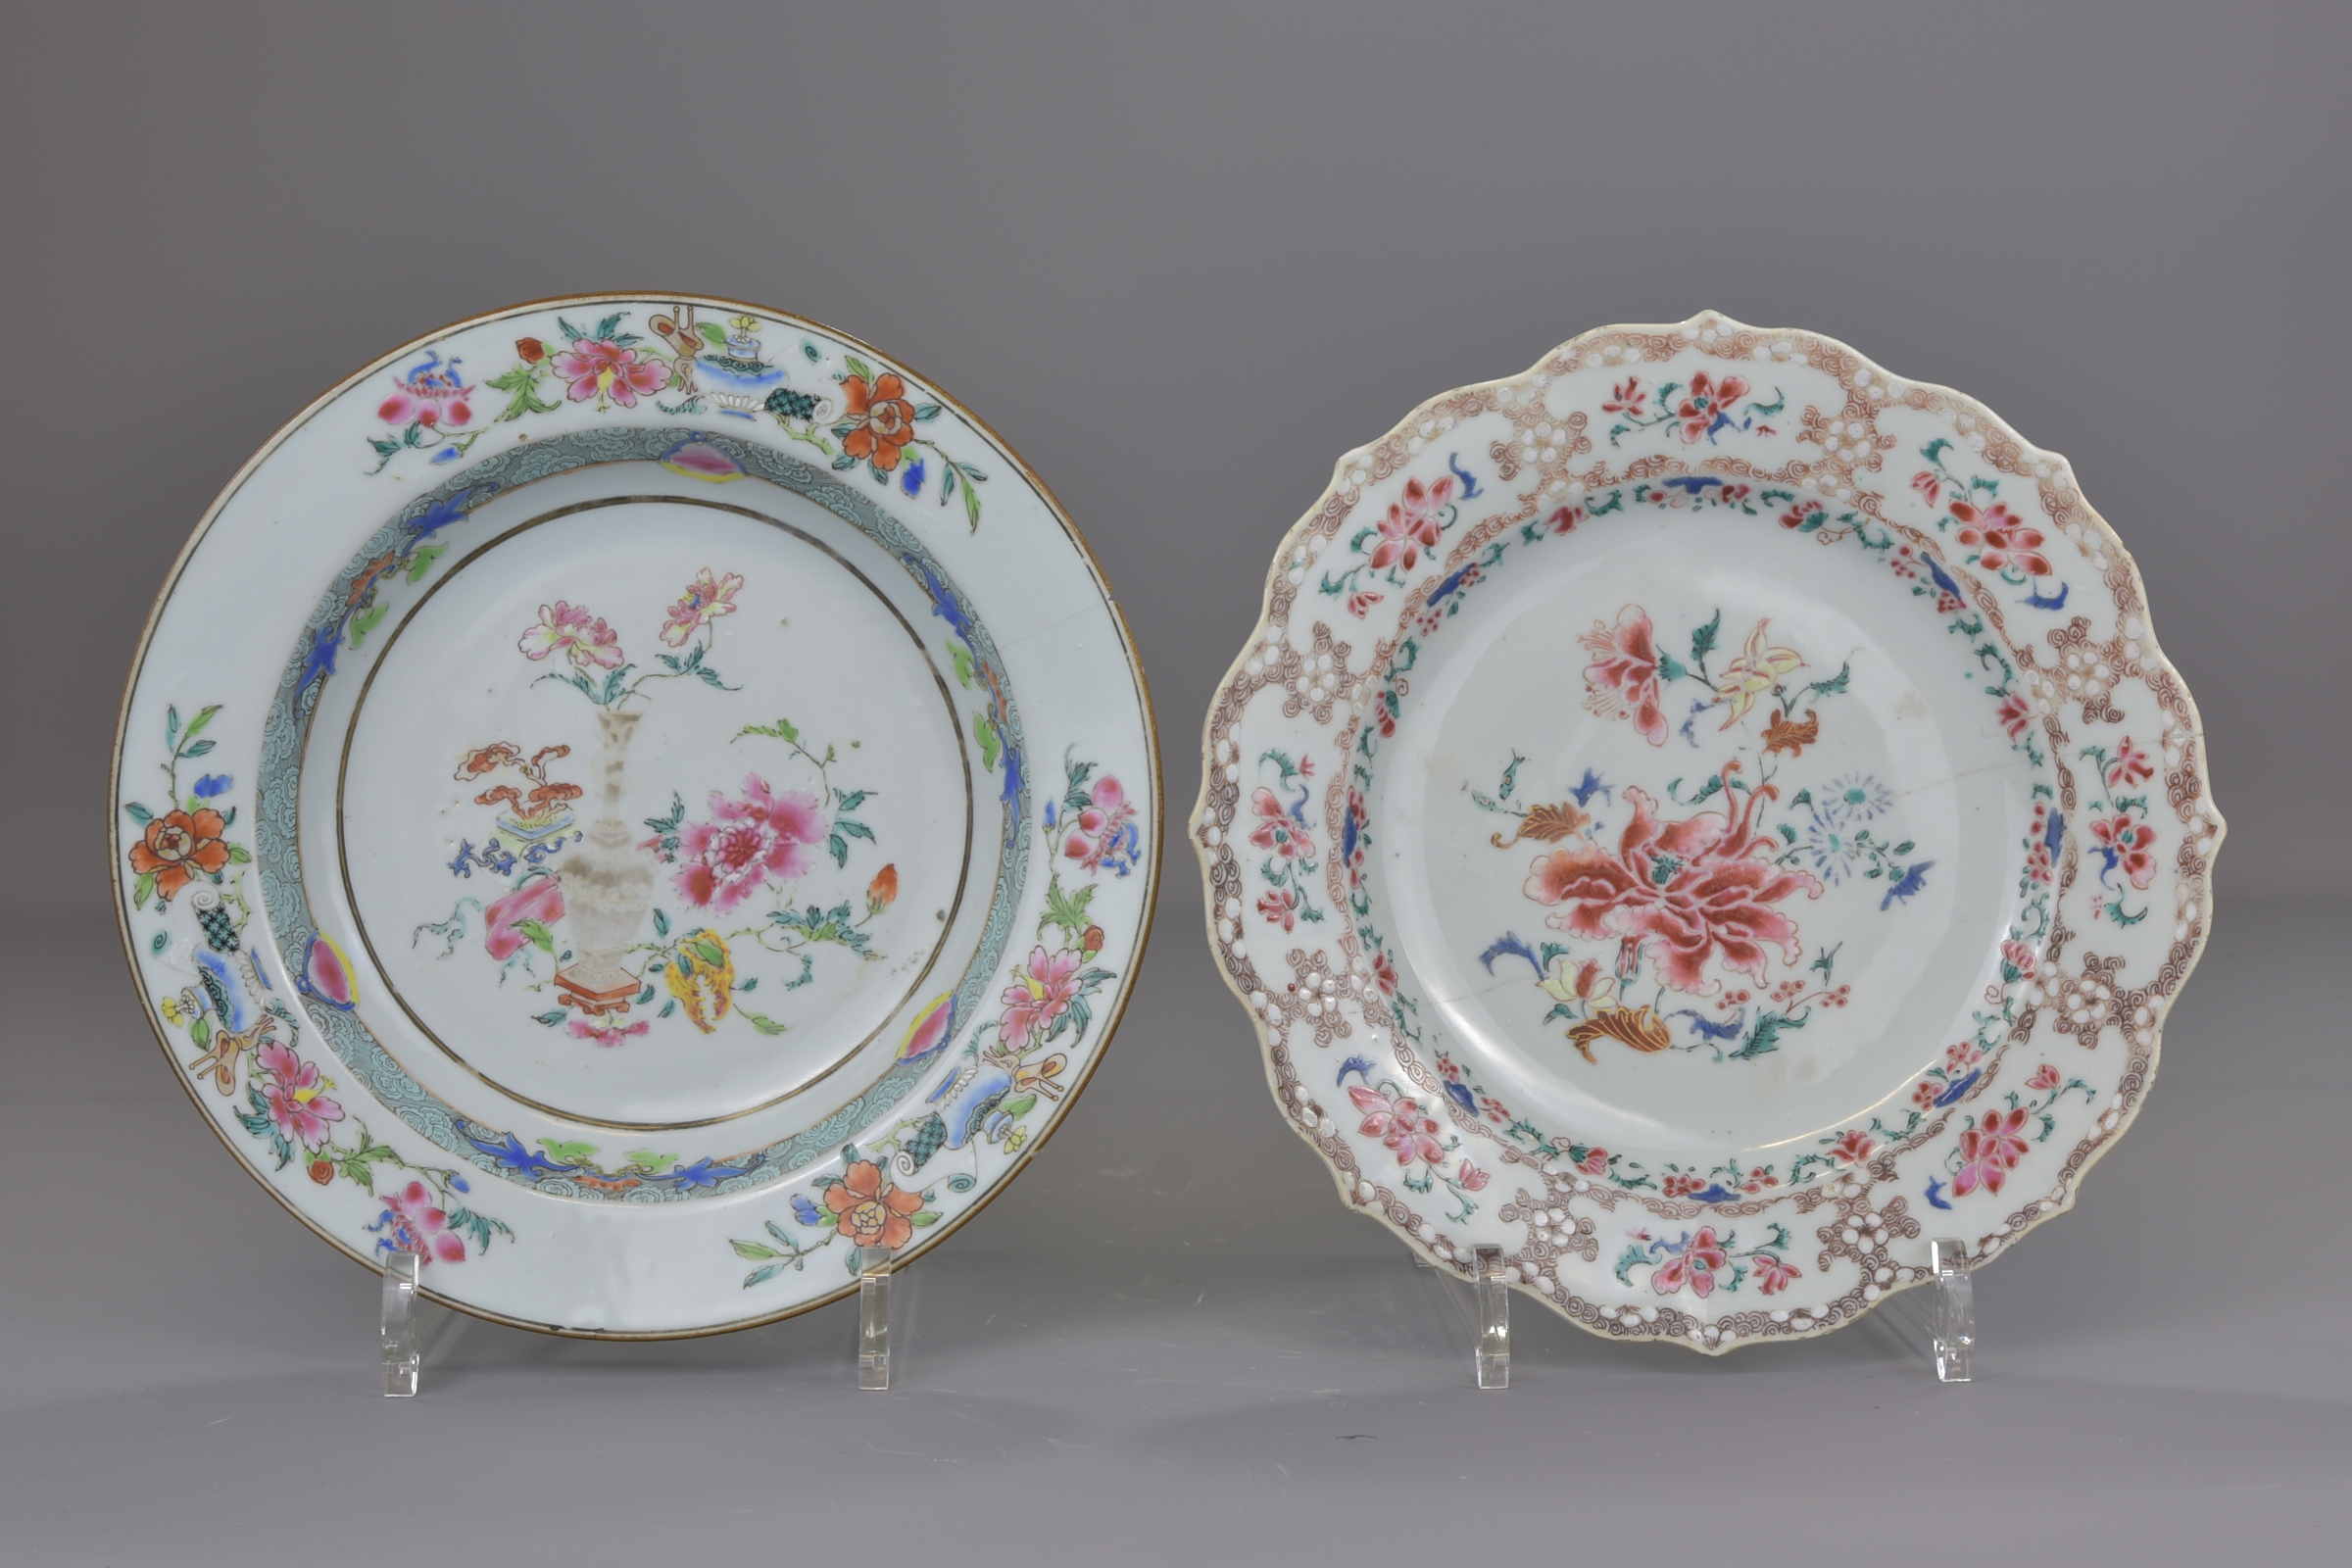 TWO CHINESE FAMILLE ROSE PORCLAIN PLATES